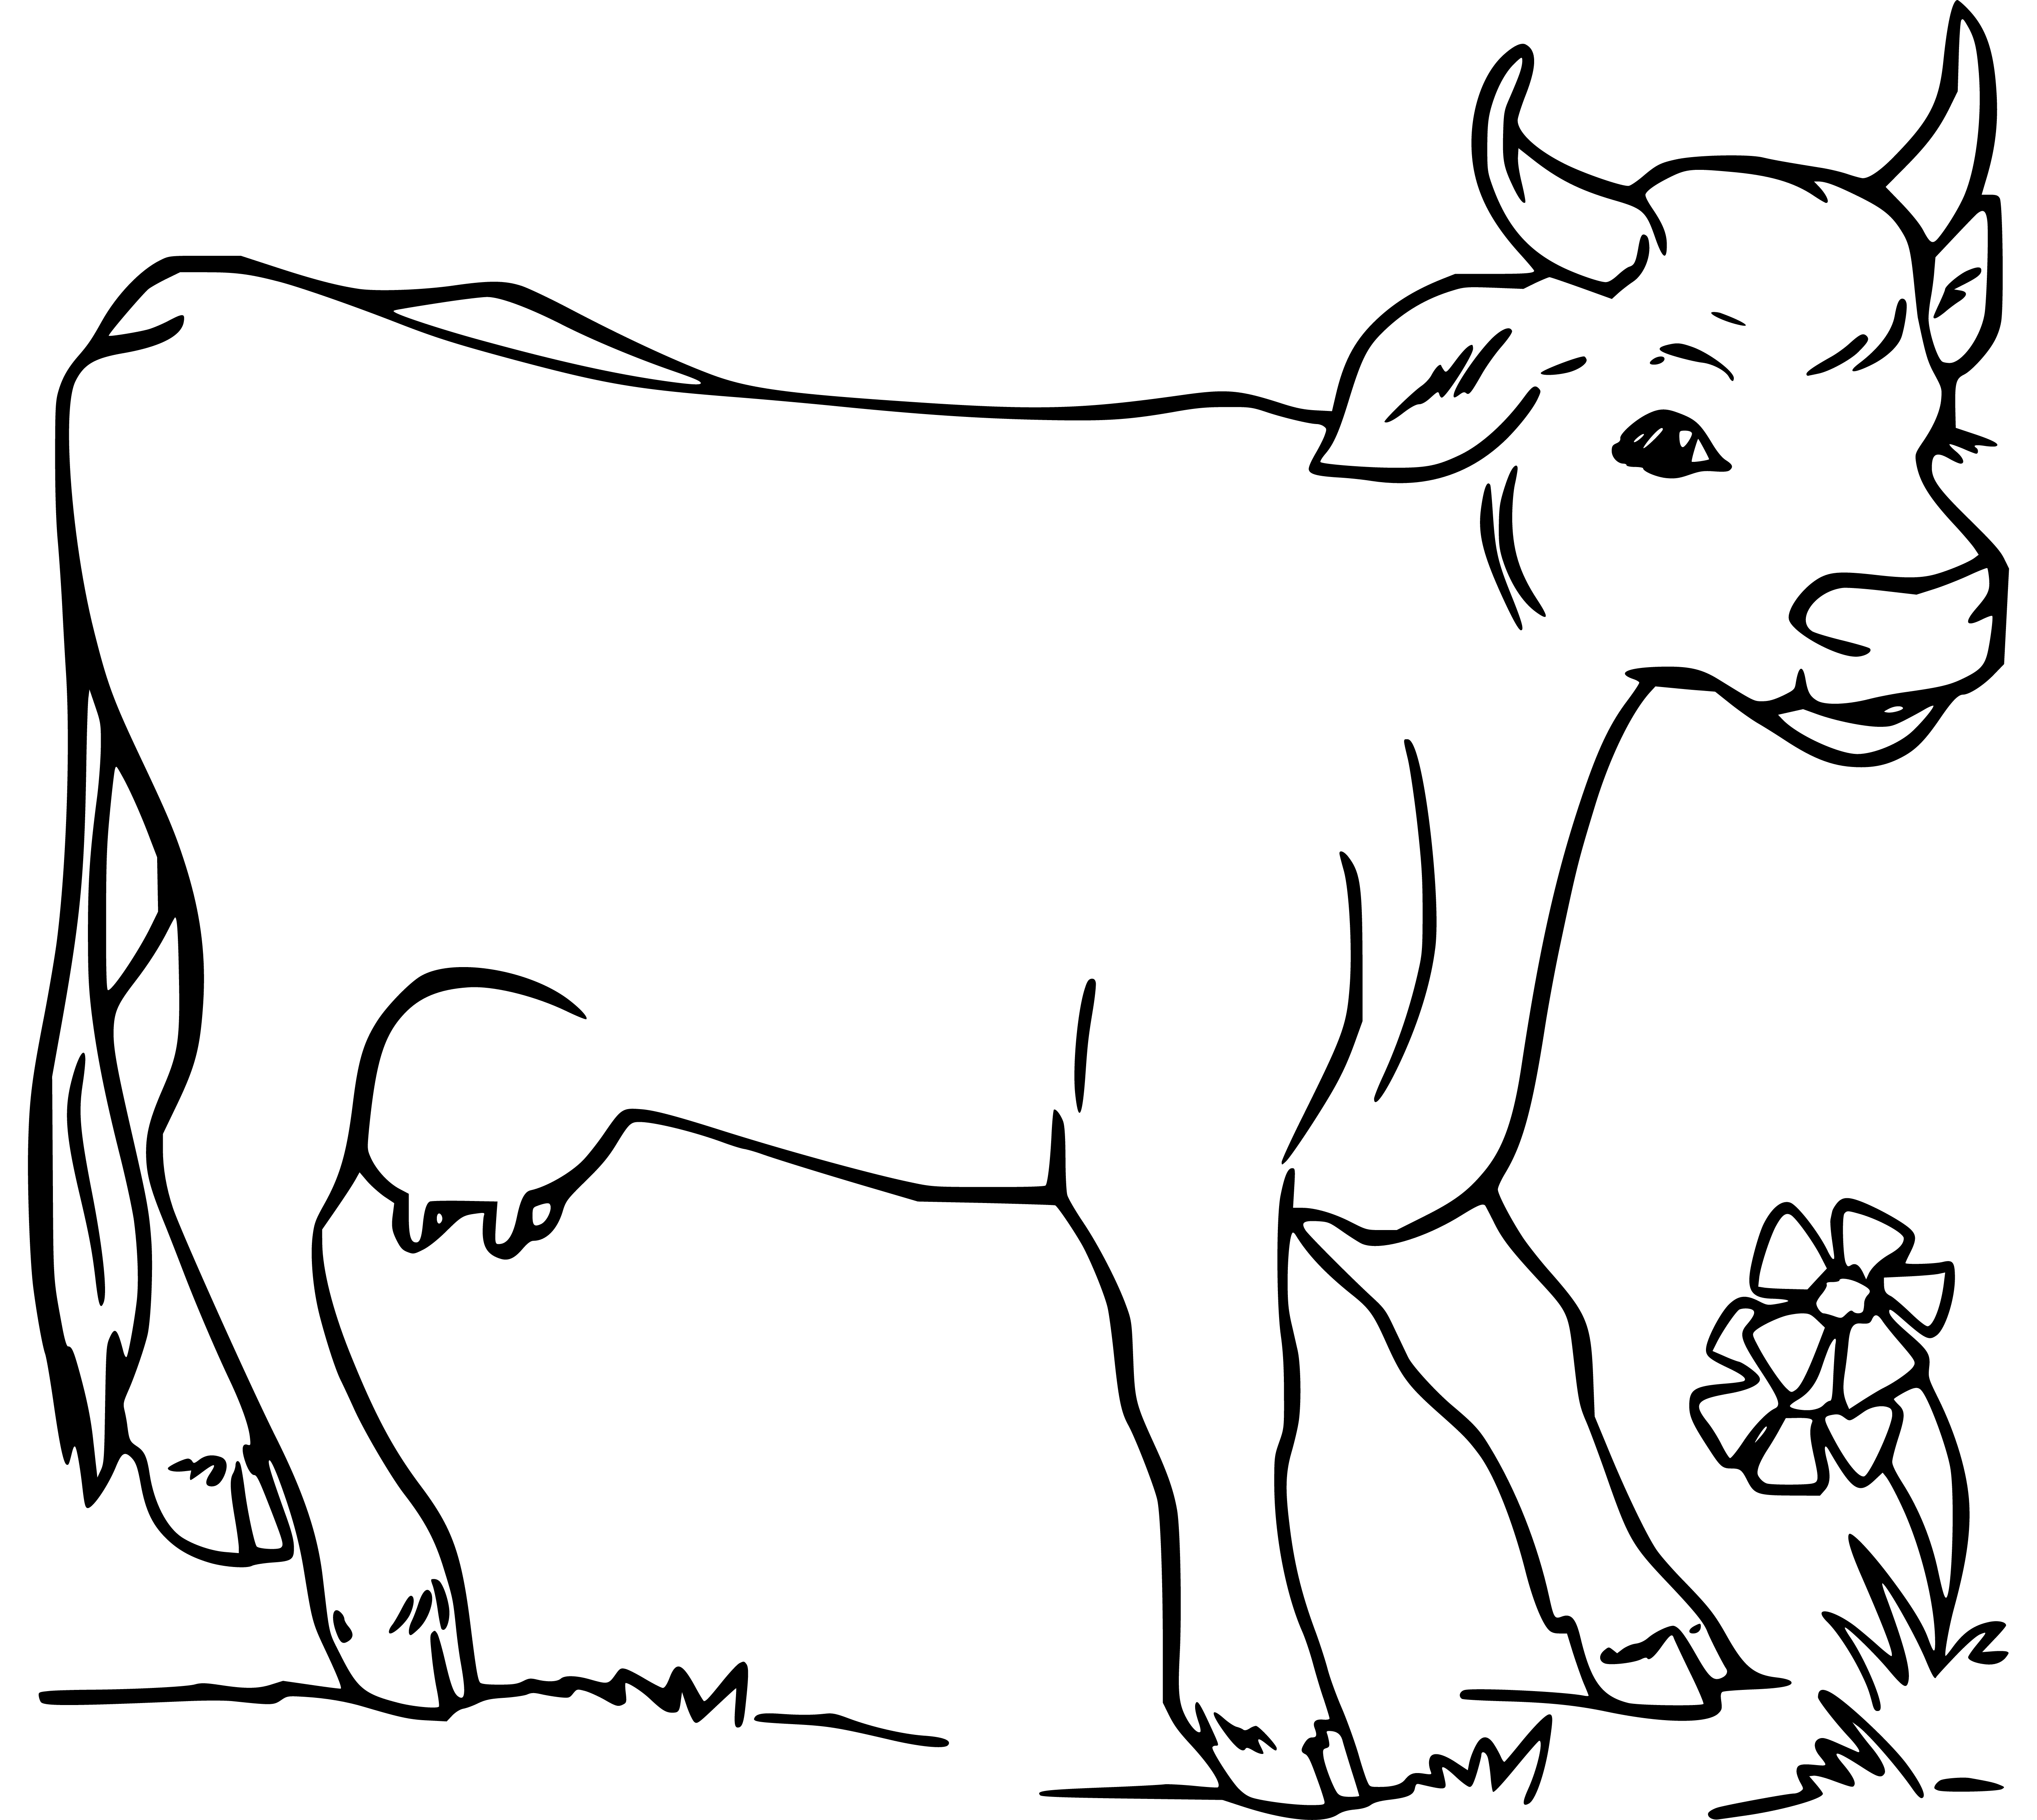 Printable Cow (Dairy Cattle) Coloring Page for kids.